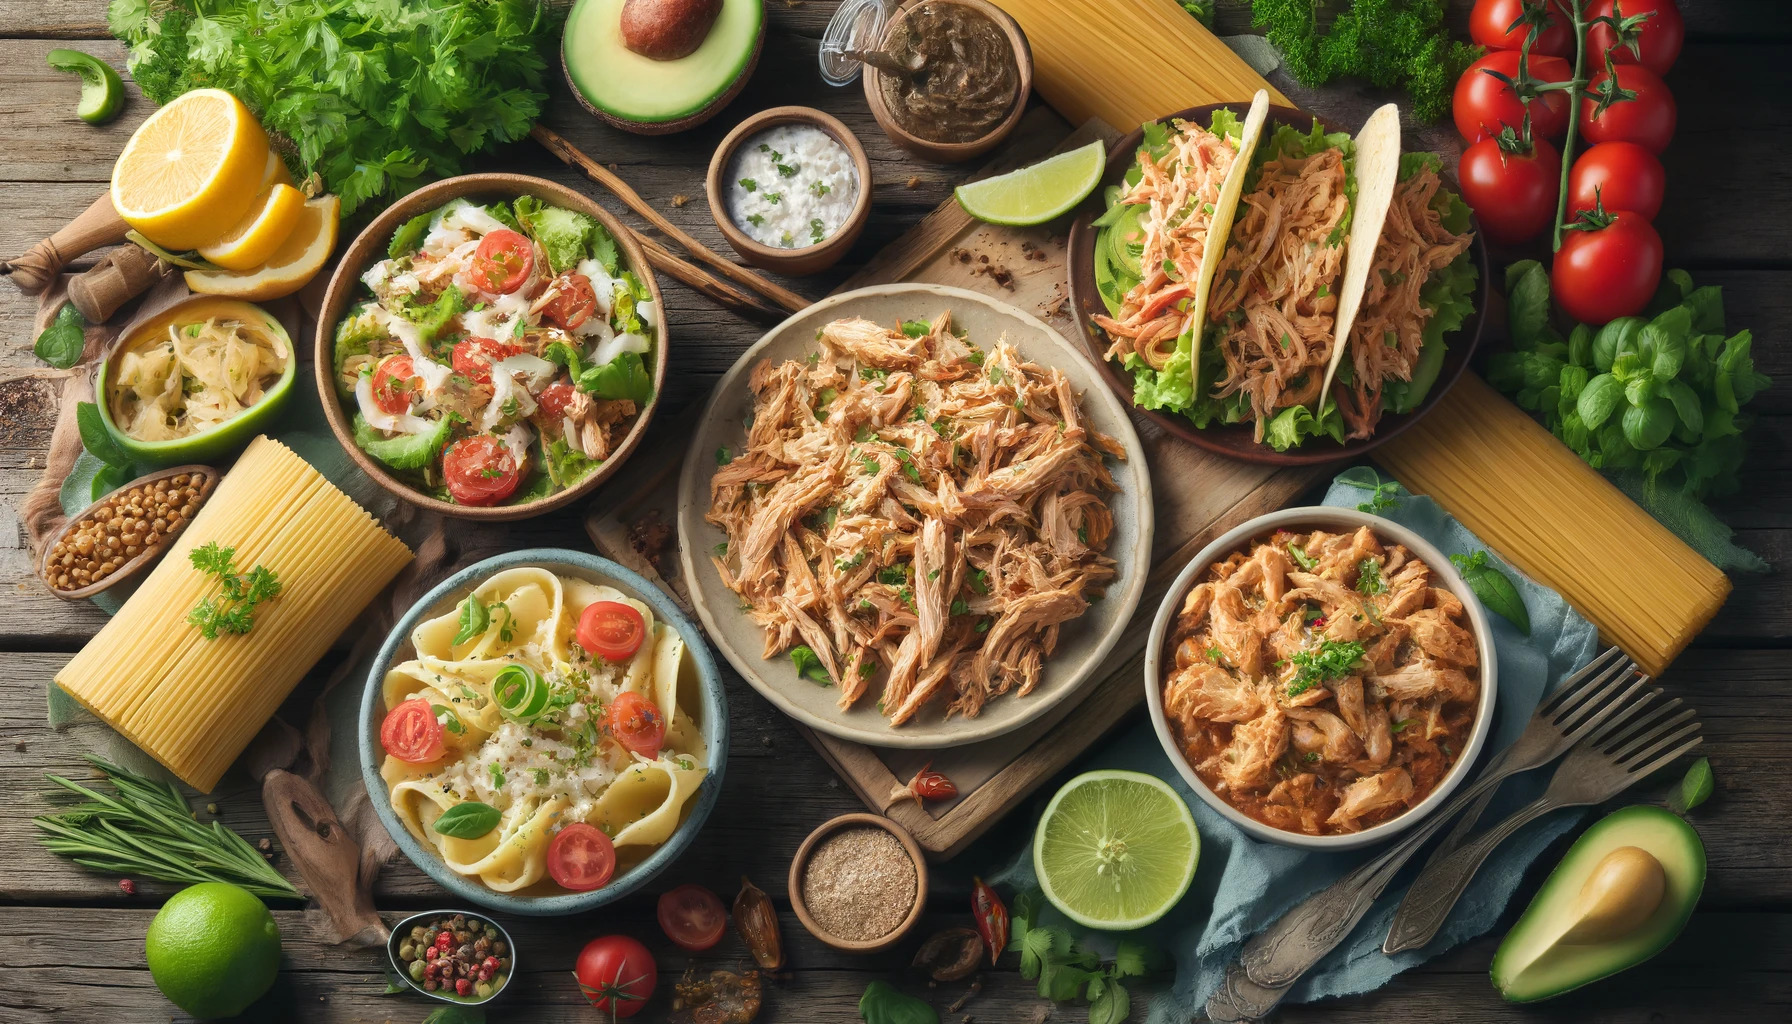 21 Meals Featuring Shredded Chicken